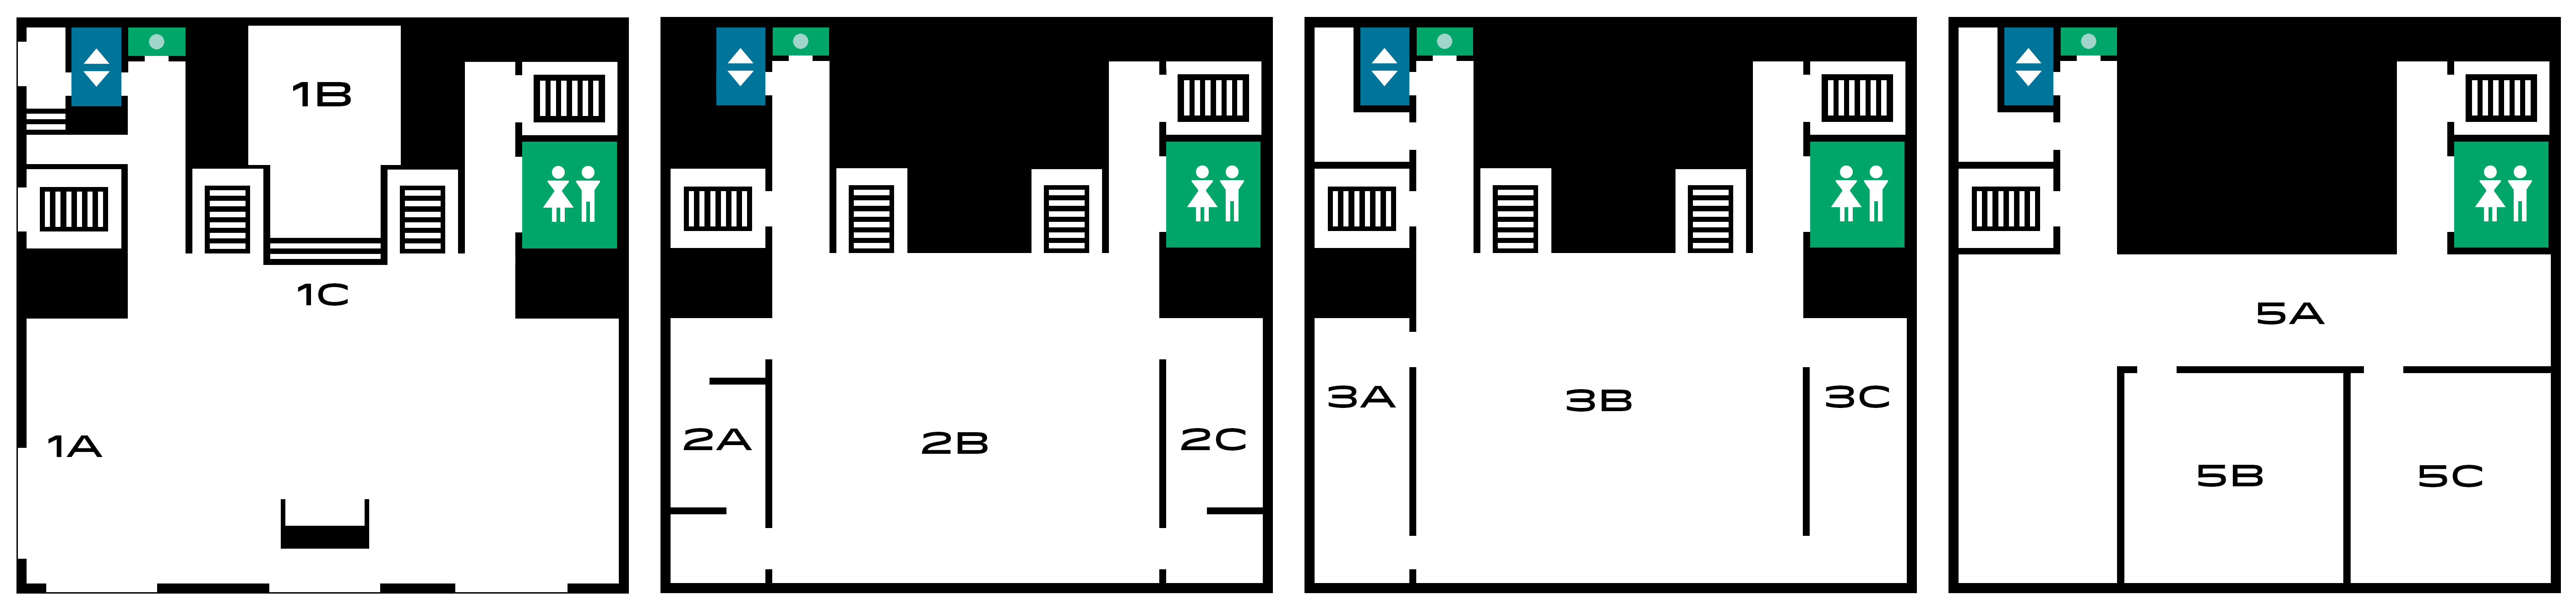 Map of basic layout of MOCA building with floors 1, 2, 3, and 5 shown .